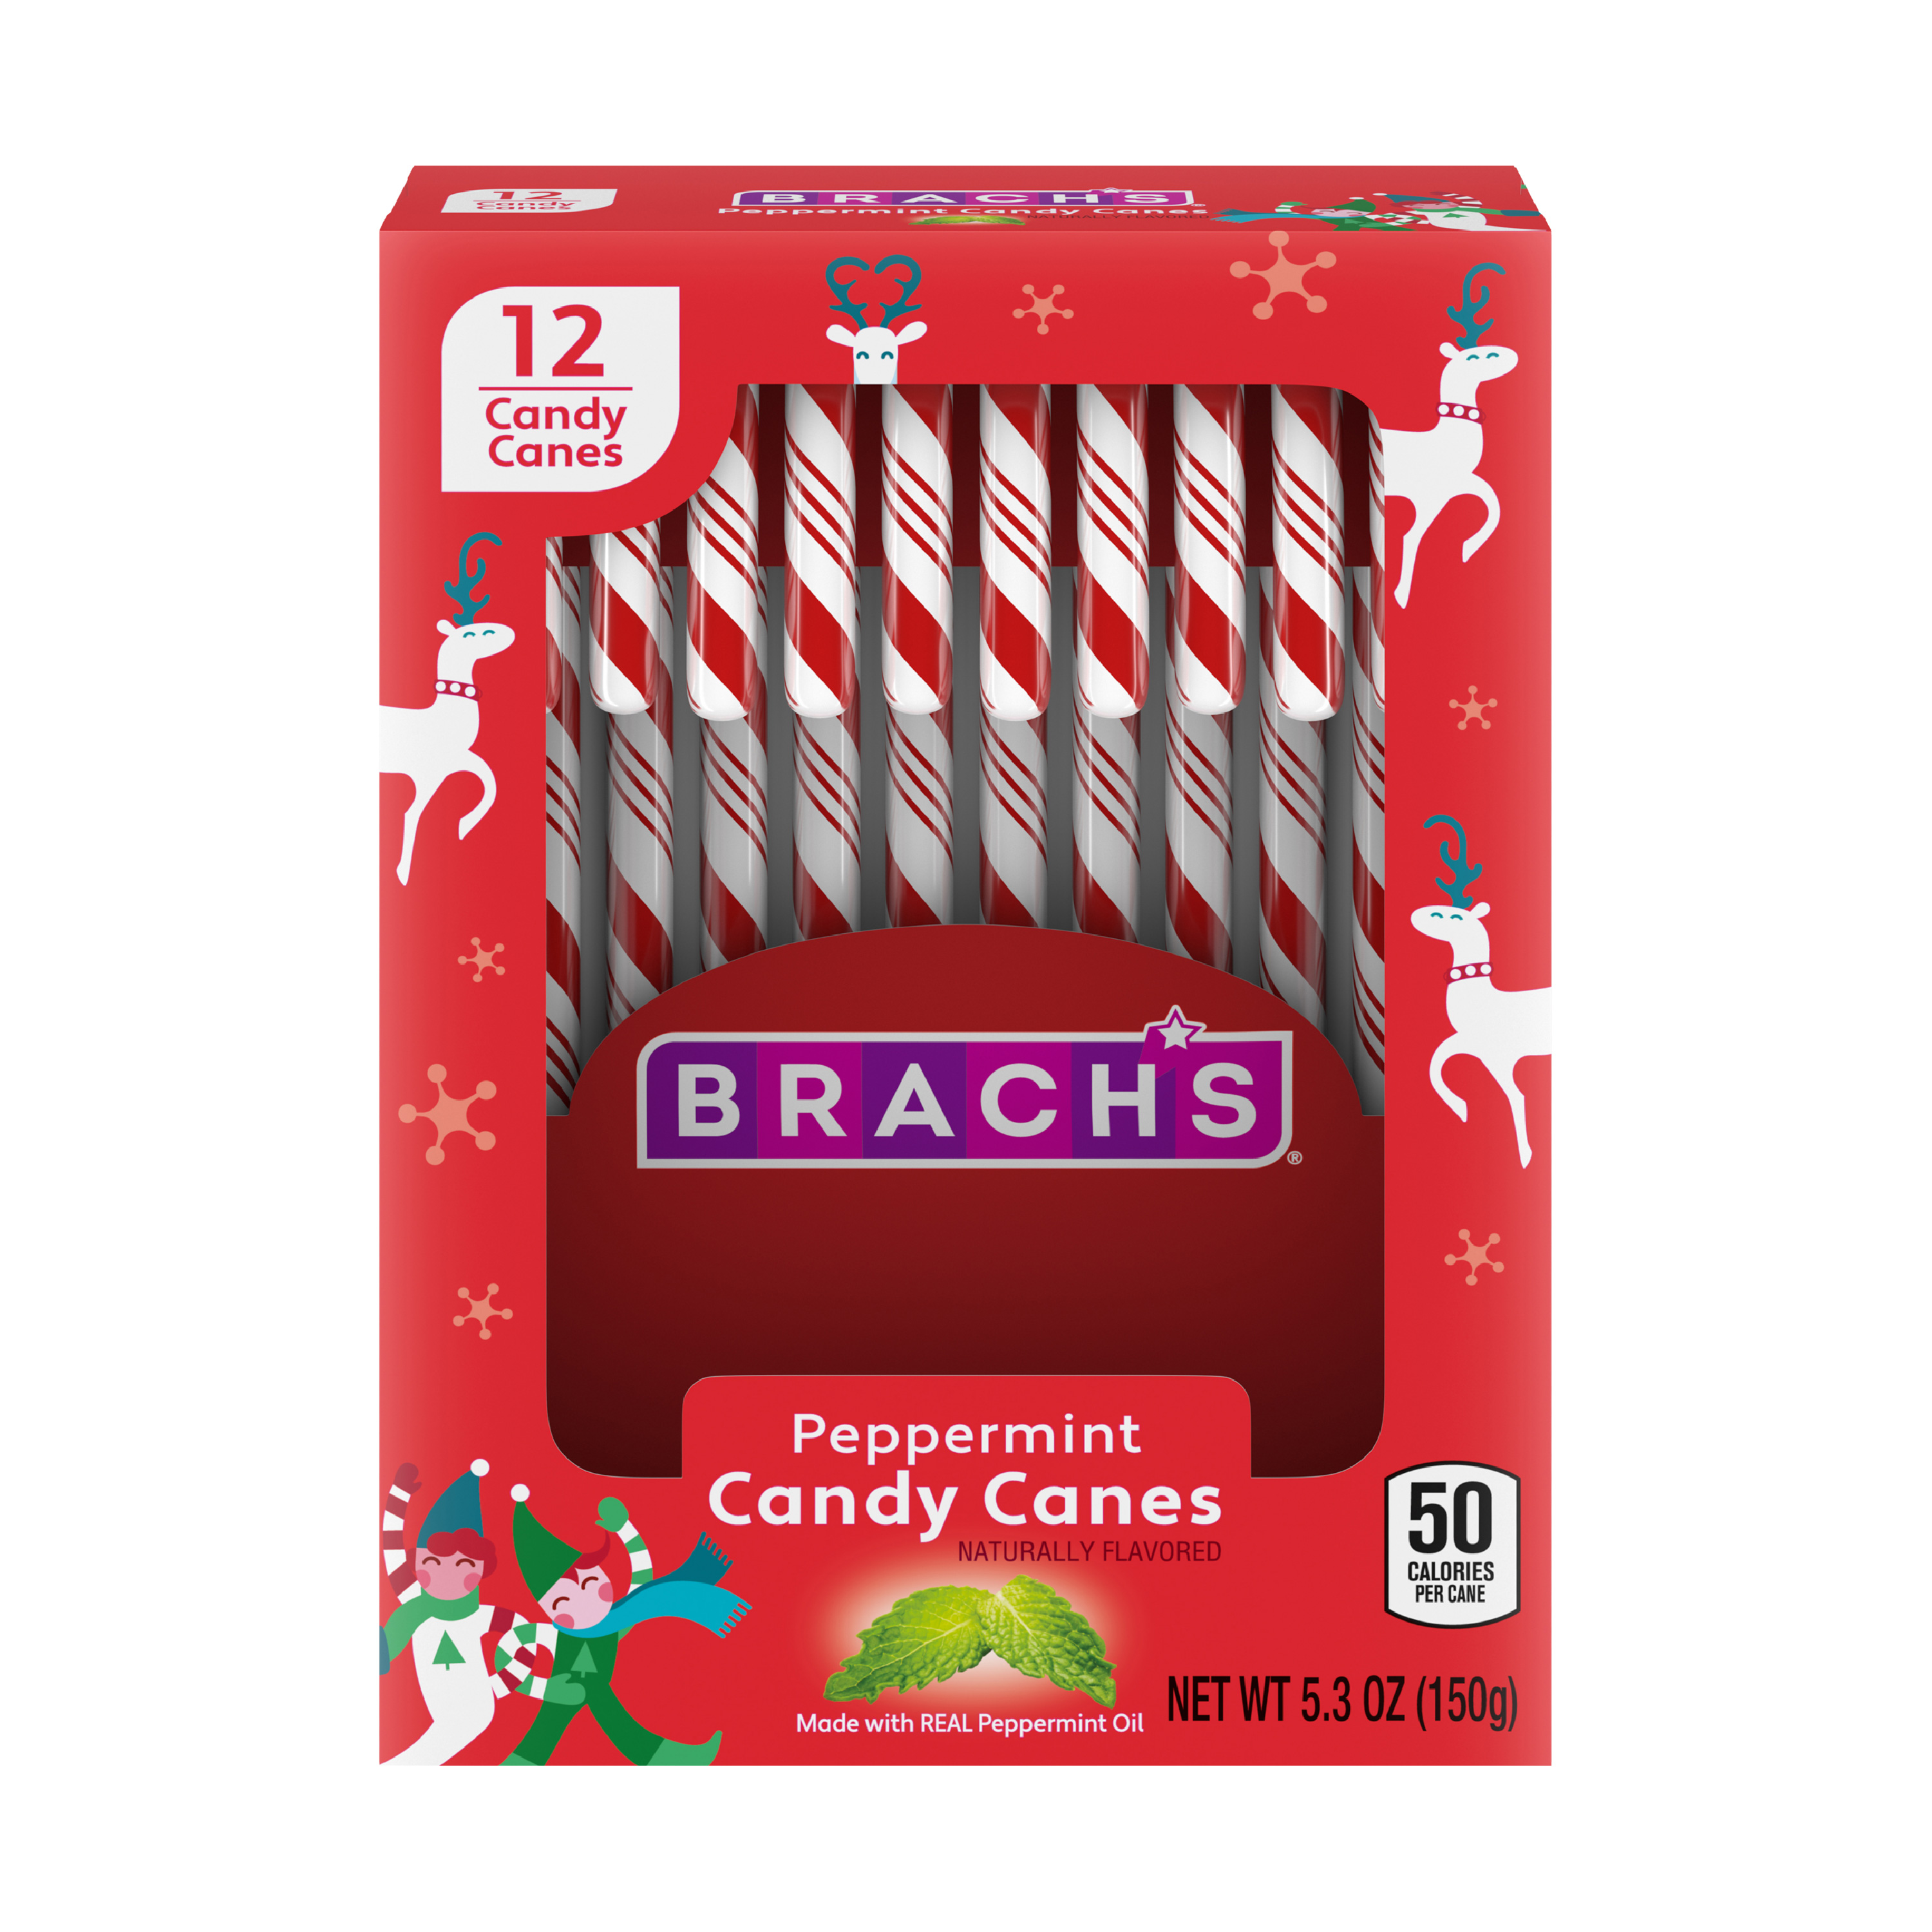 Brach's Peppermint Candy Canes, Holiday Christmas Candy, 12 Ct., 5.3oz - image 1 of 14